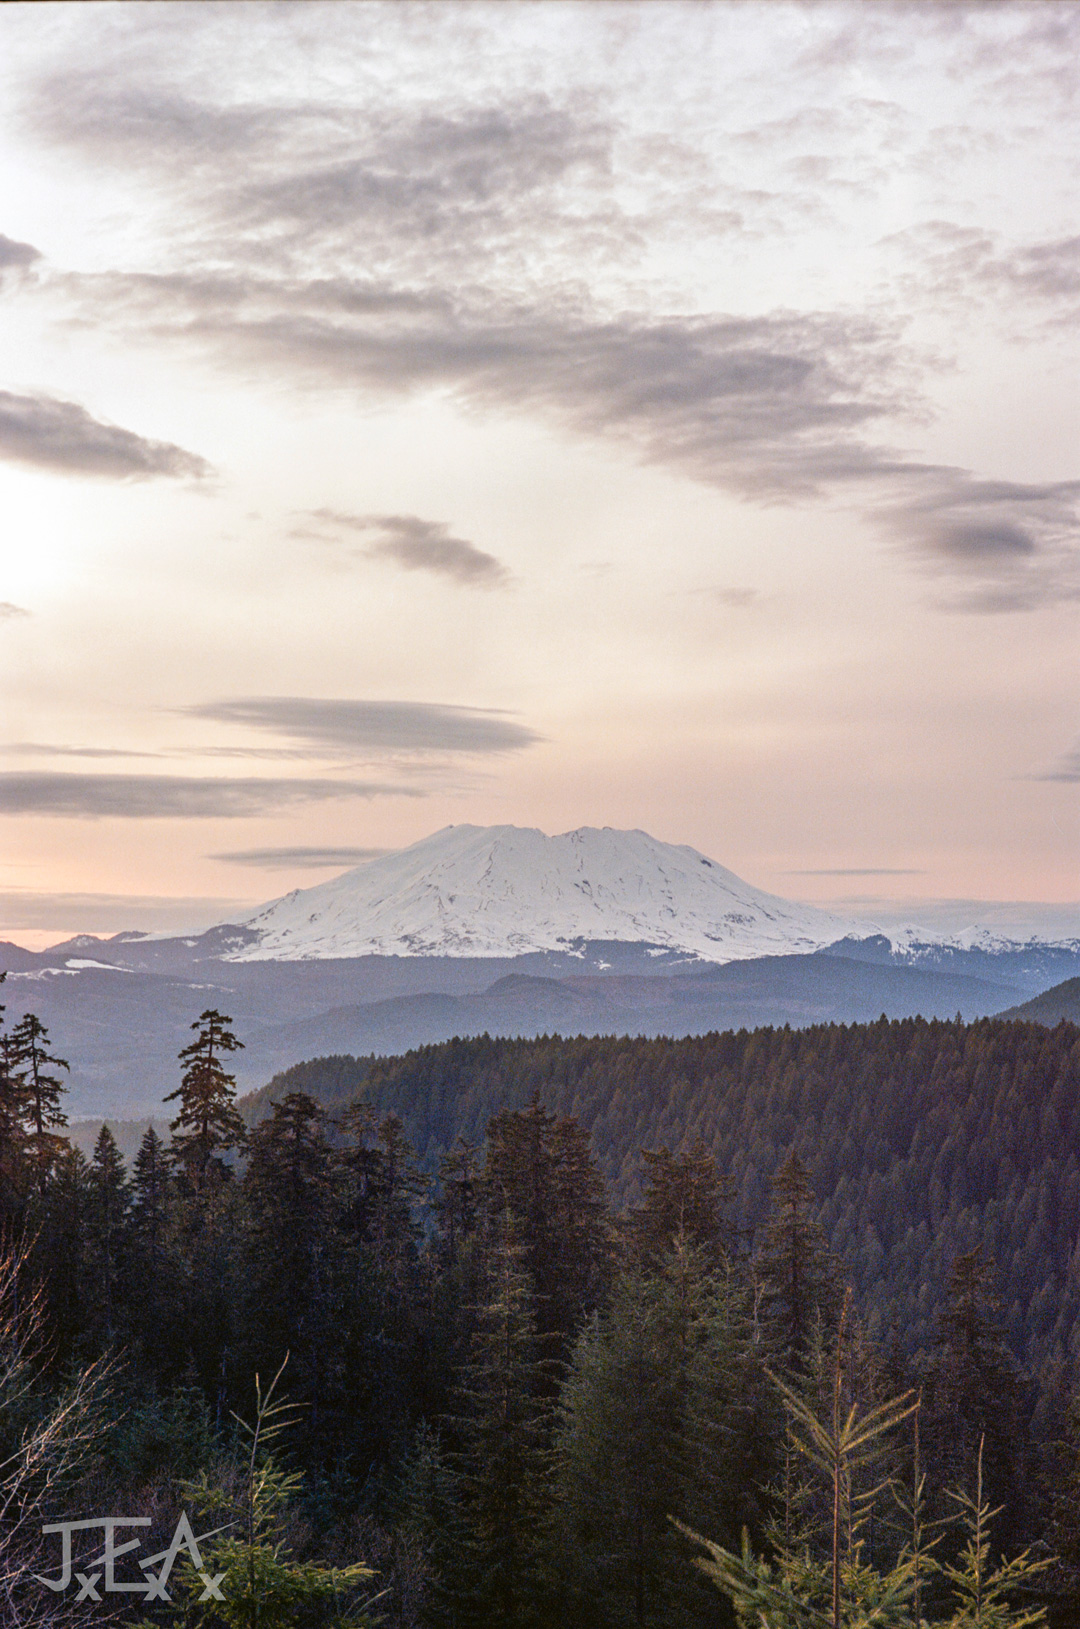 A portrait image of Mt St Helens seen from Mcclellan viewpoint in the Gifford Pinchot National Forest.